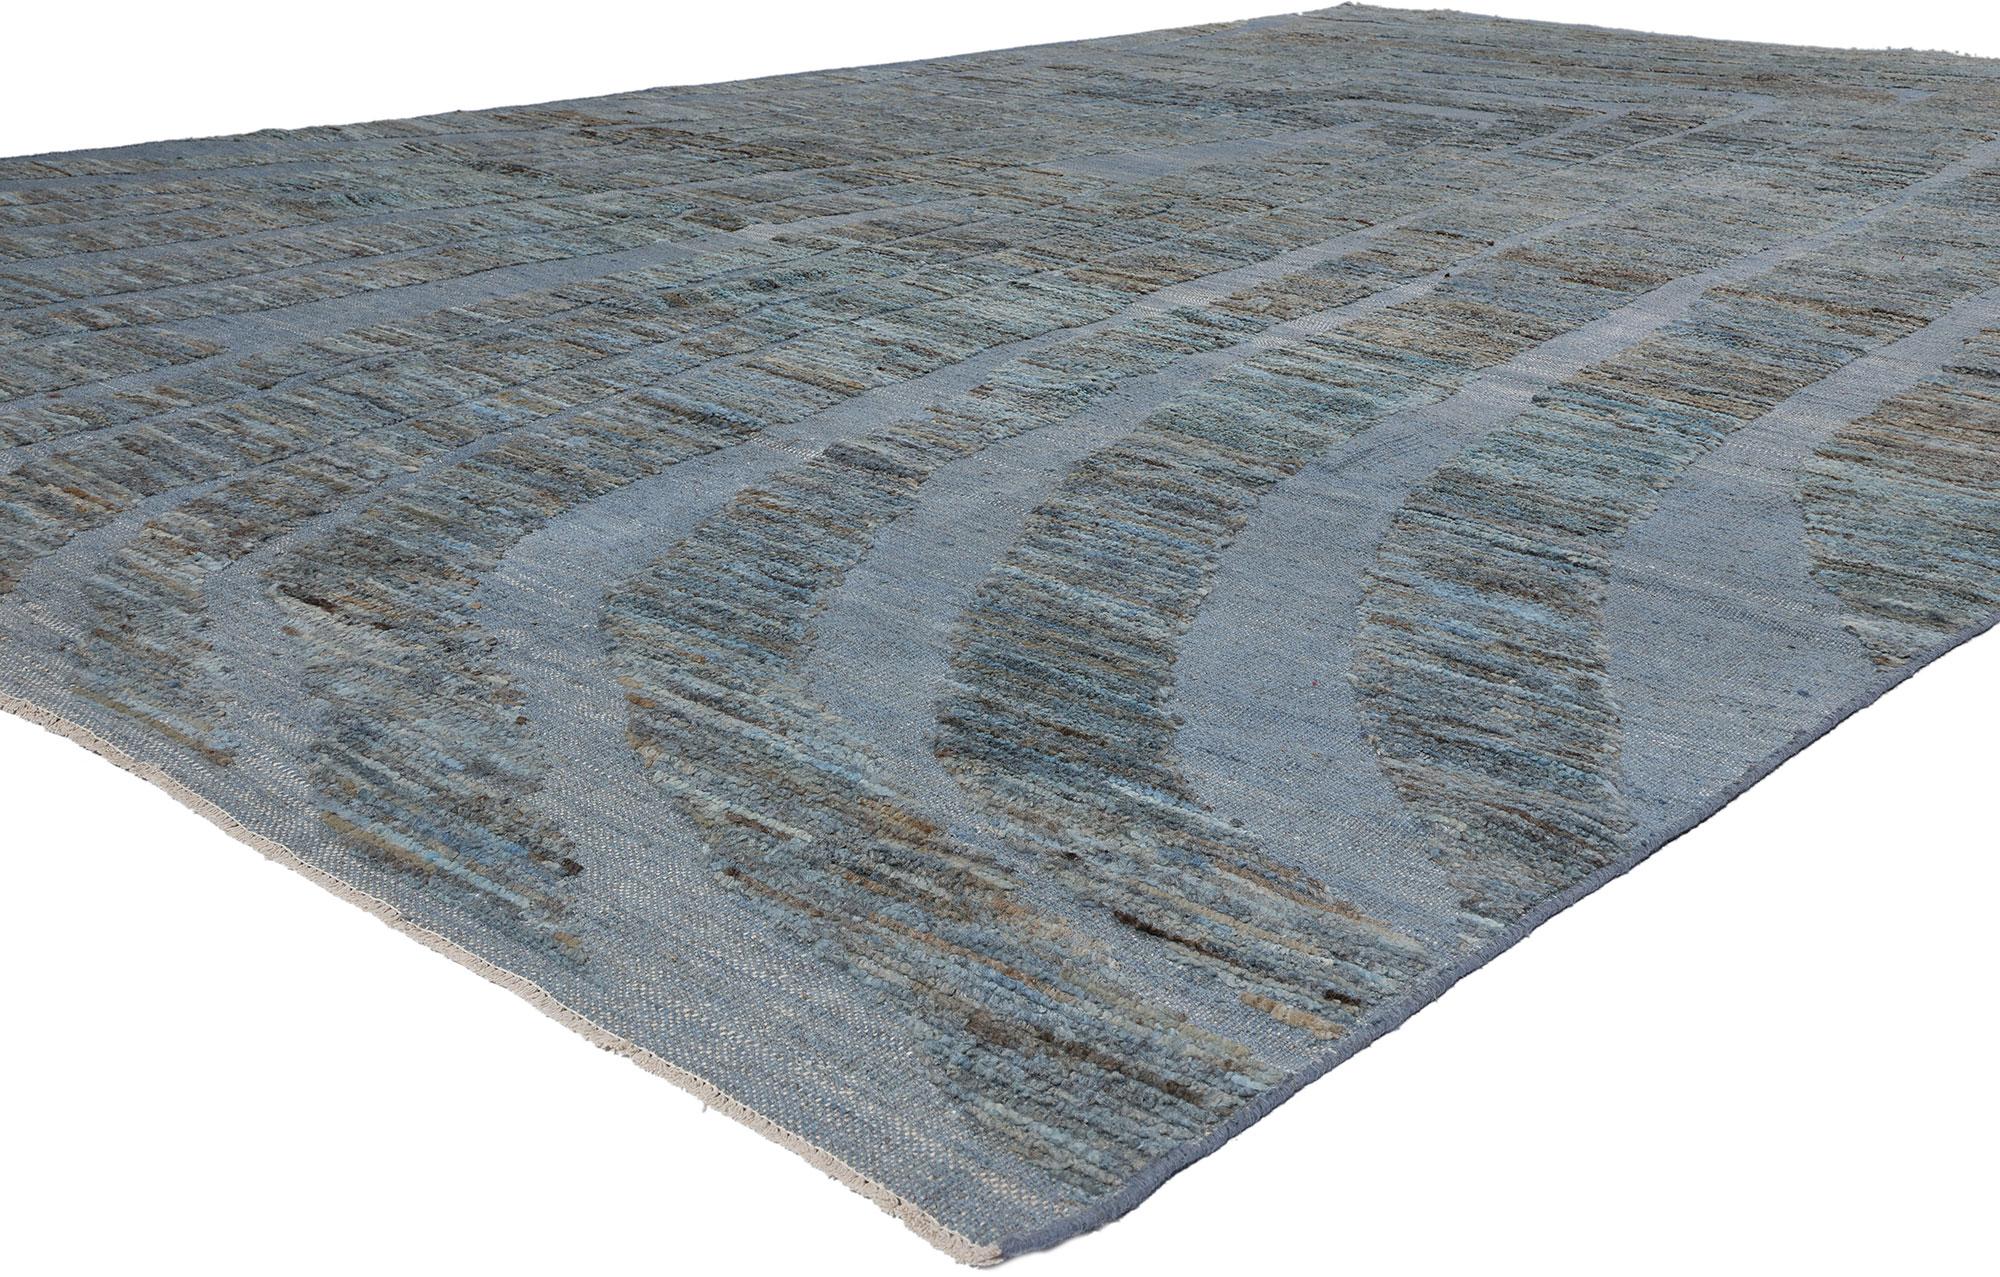 81090 Biophilic Blue Moroccan High-Low Rug, 09'07 x 14'09. Step into a world where the enchanting beauty of Moroccan craftsmanship meets the serene whispers of coastal shores. This hand knotted wool Moroccan high and low pile rug invites you on a